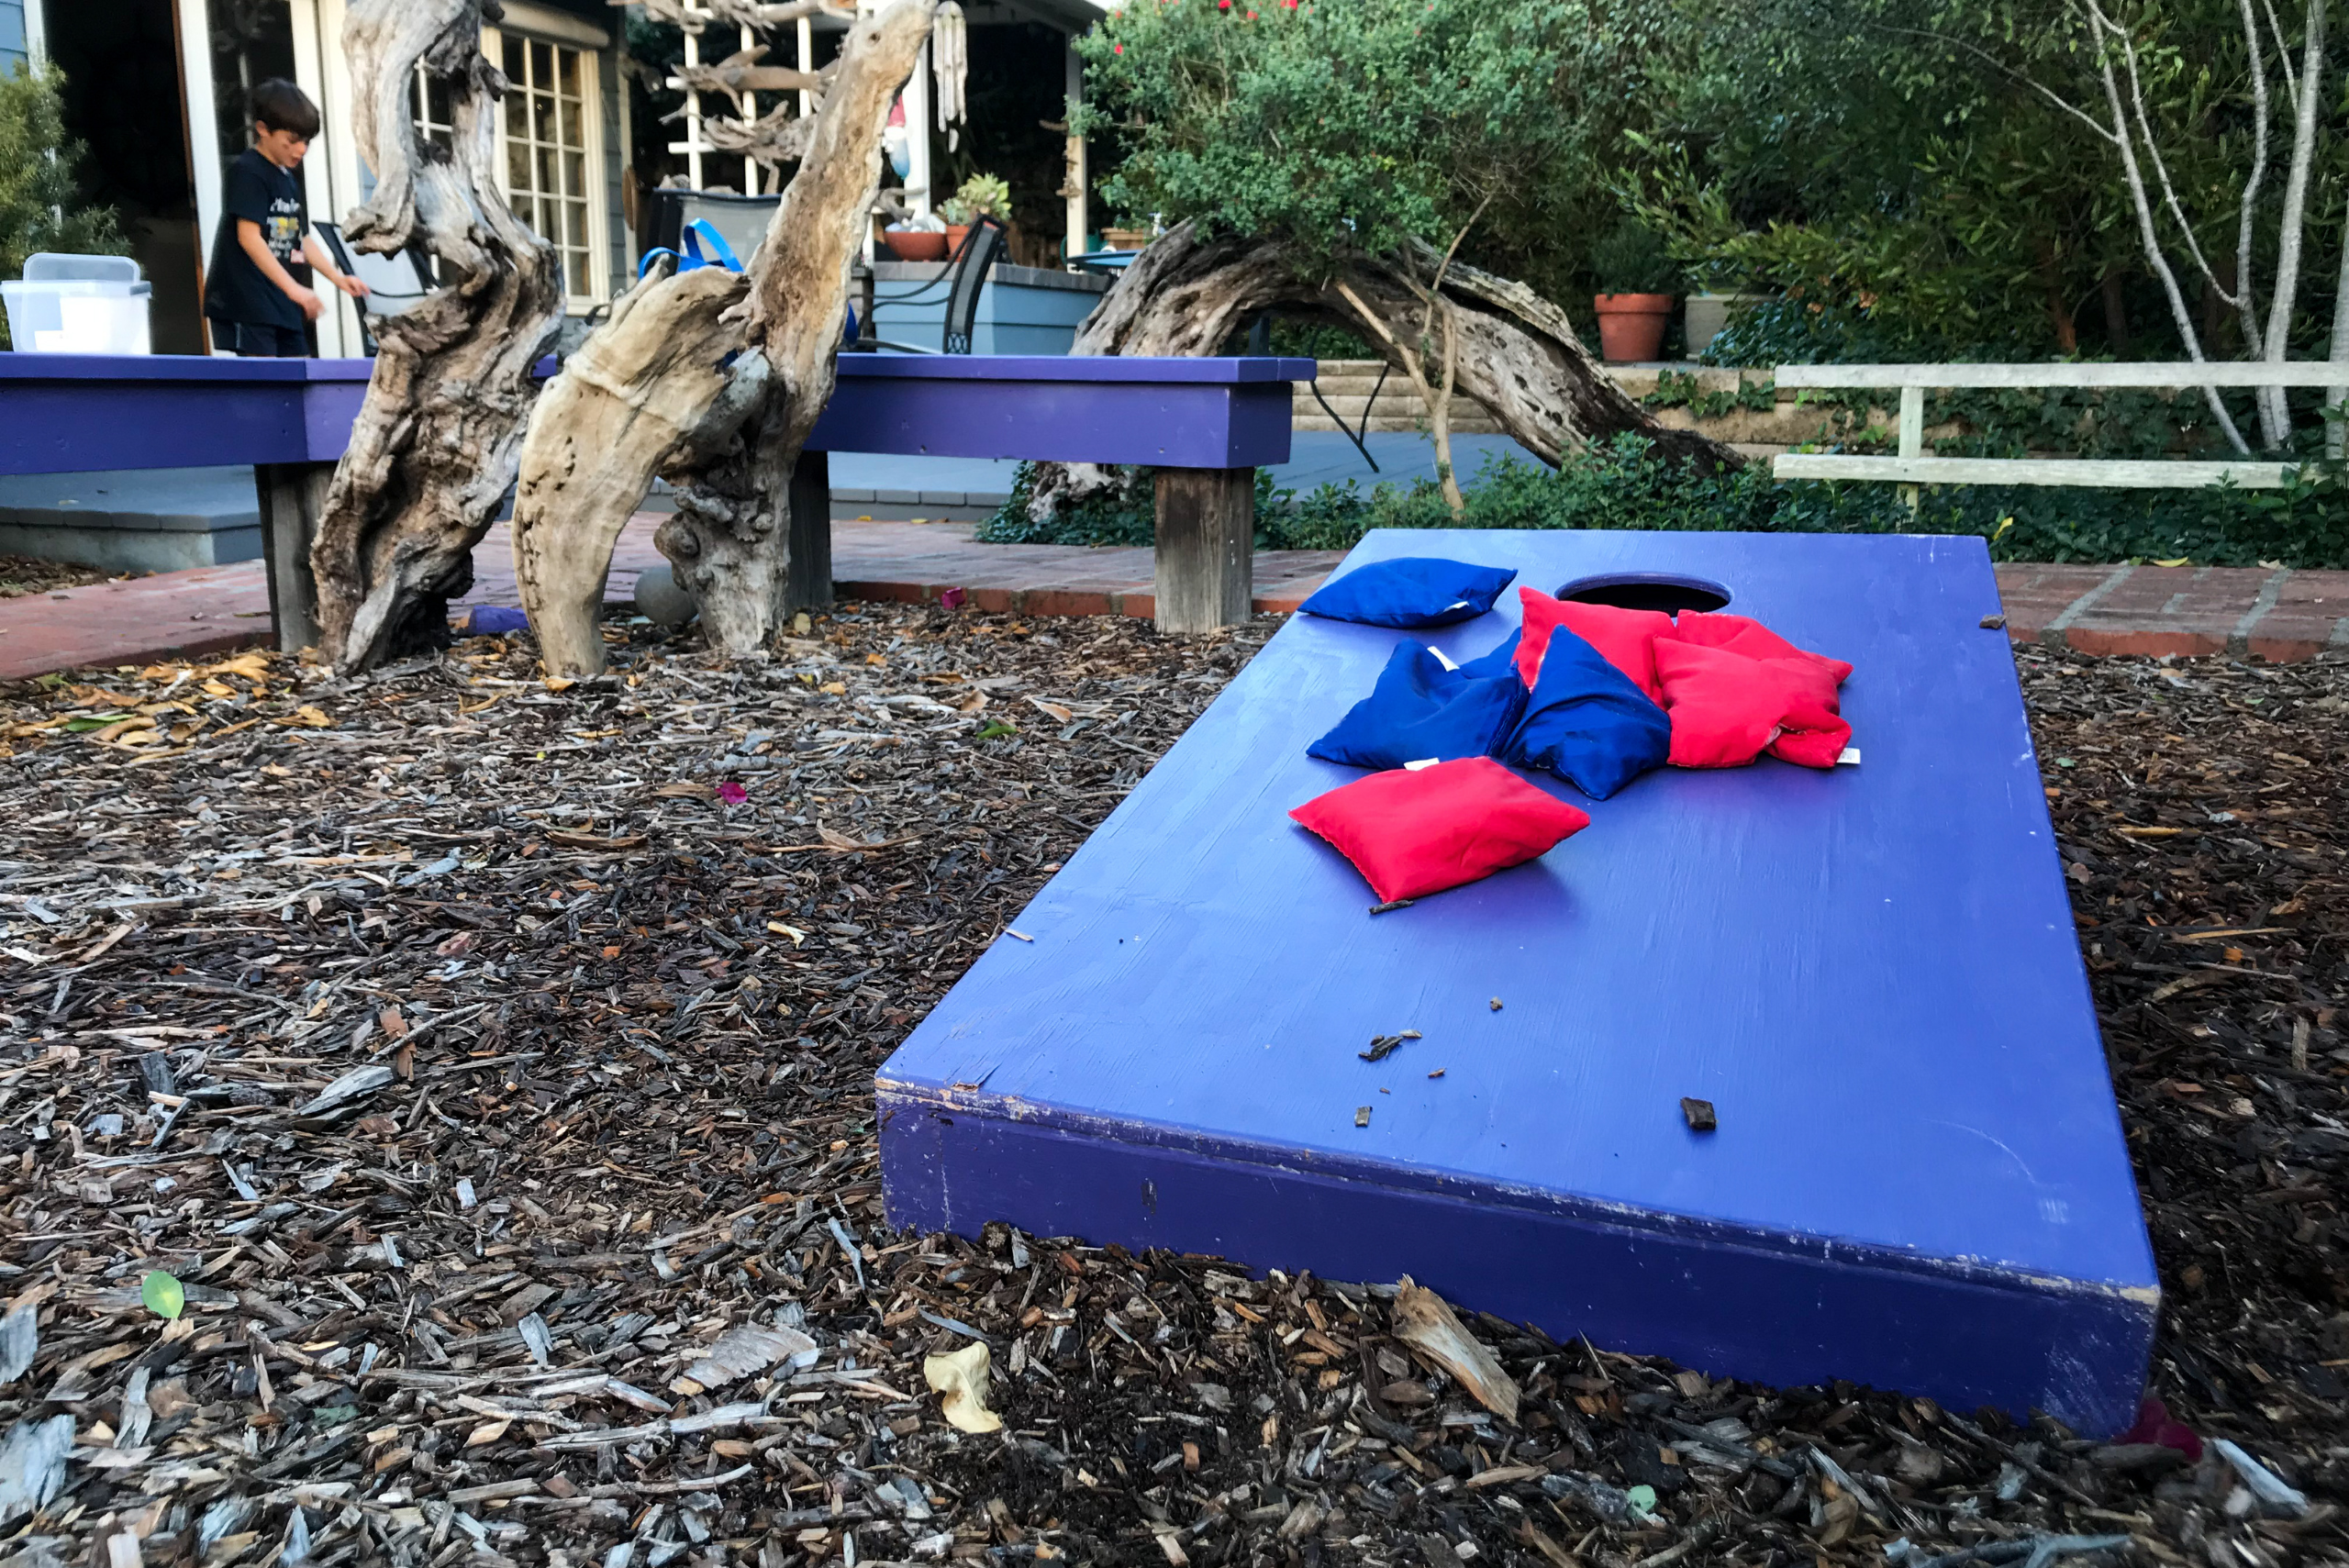 Blue corn hole board with bean bags on top.